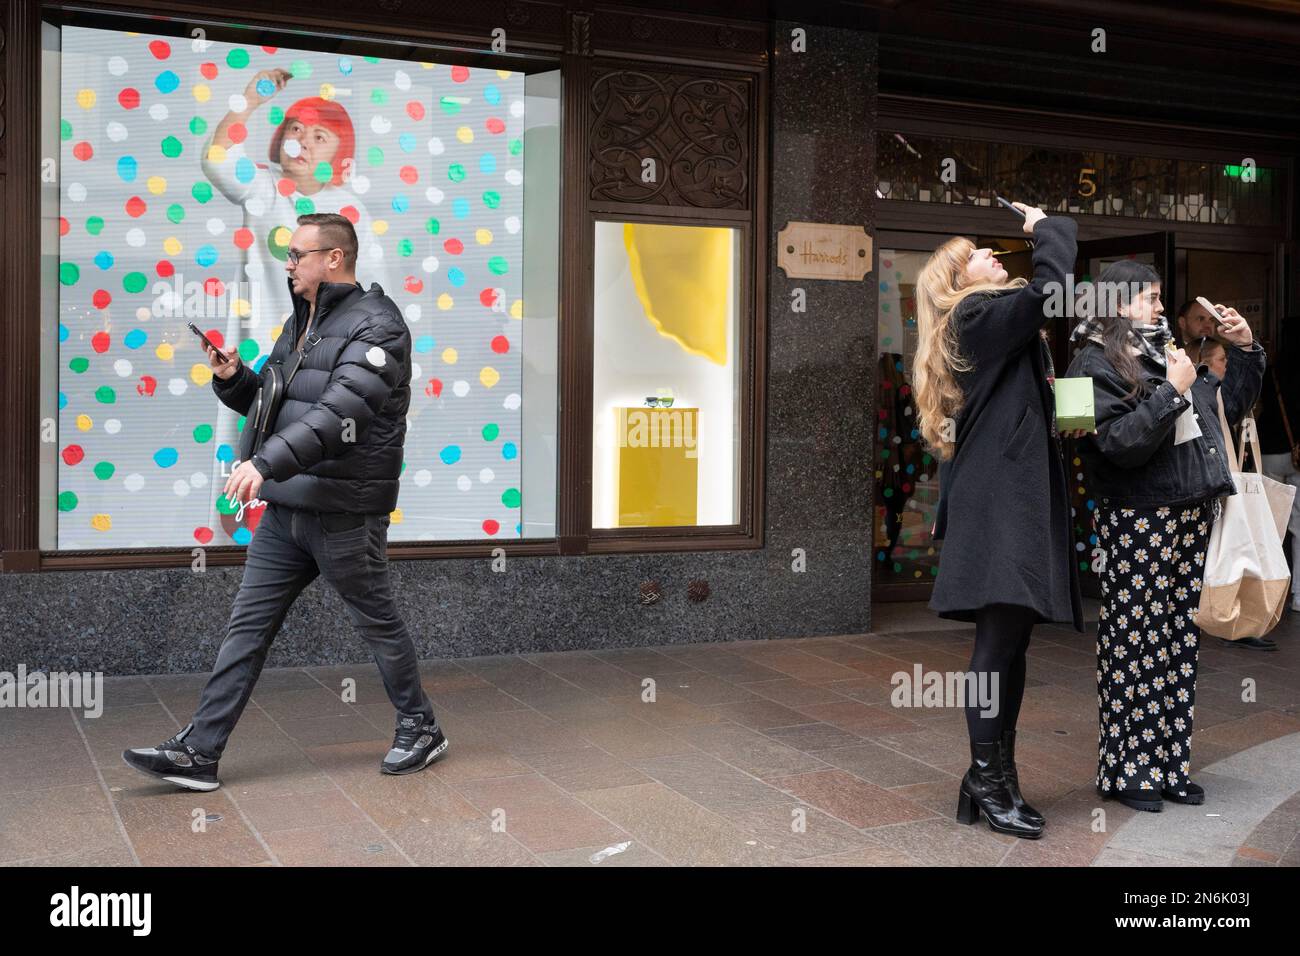 Louis Vuitton takes over Harrods exterior to launch Yayoi Kusama collection